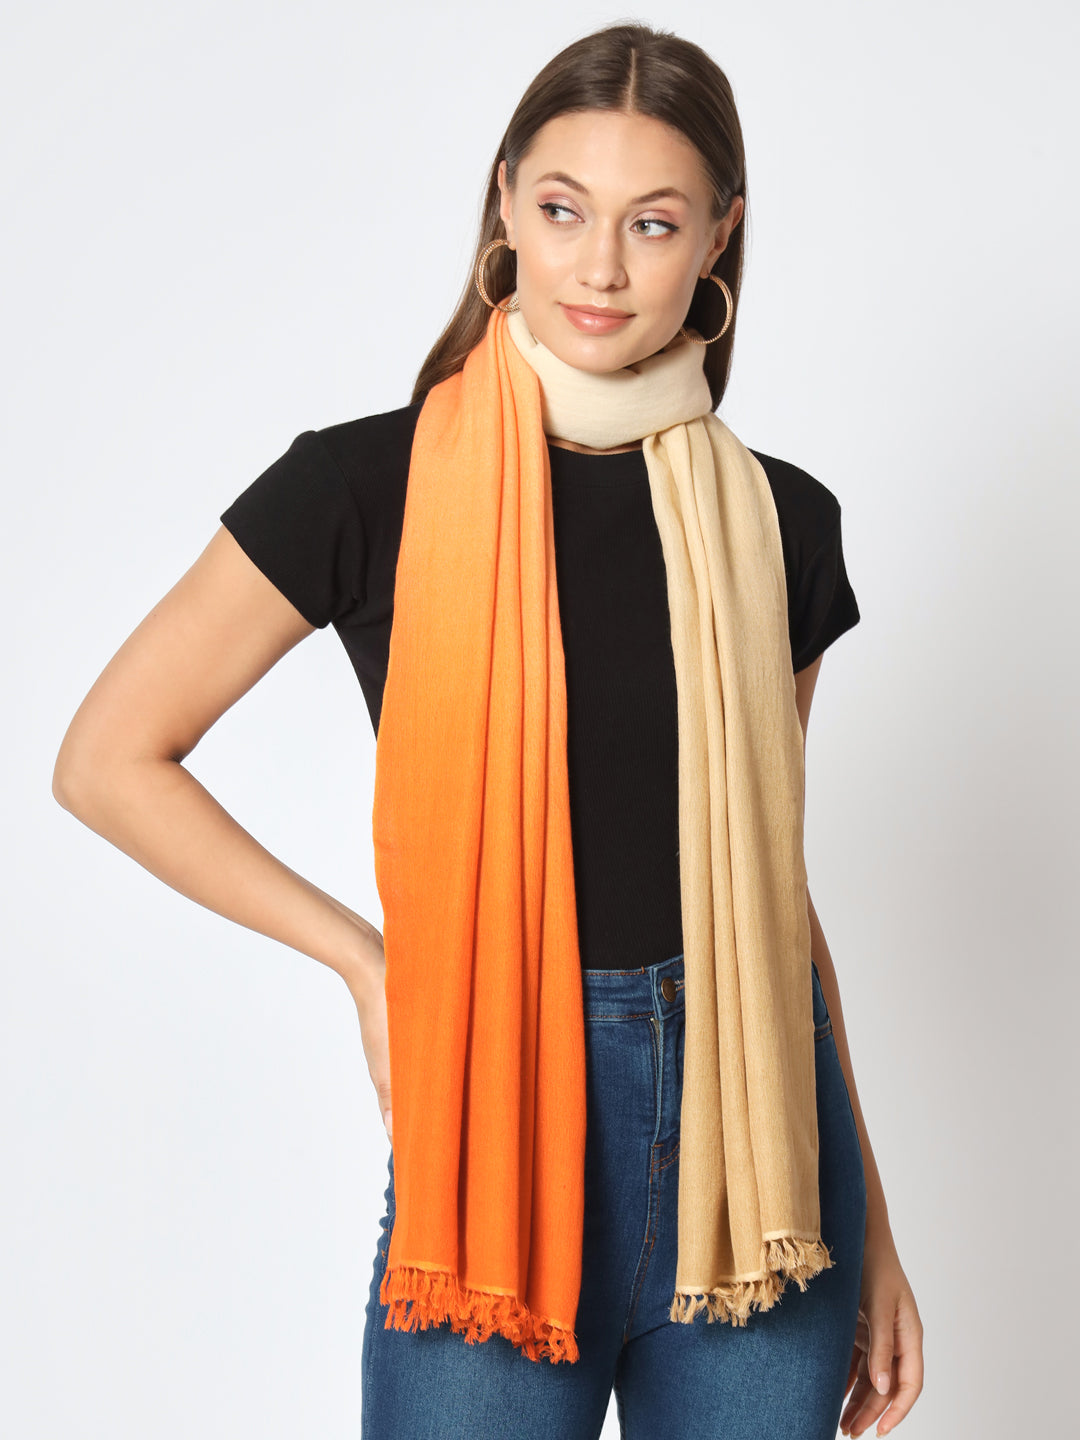 winter scarves for women, wool shawl for ladies